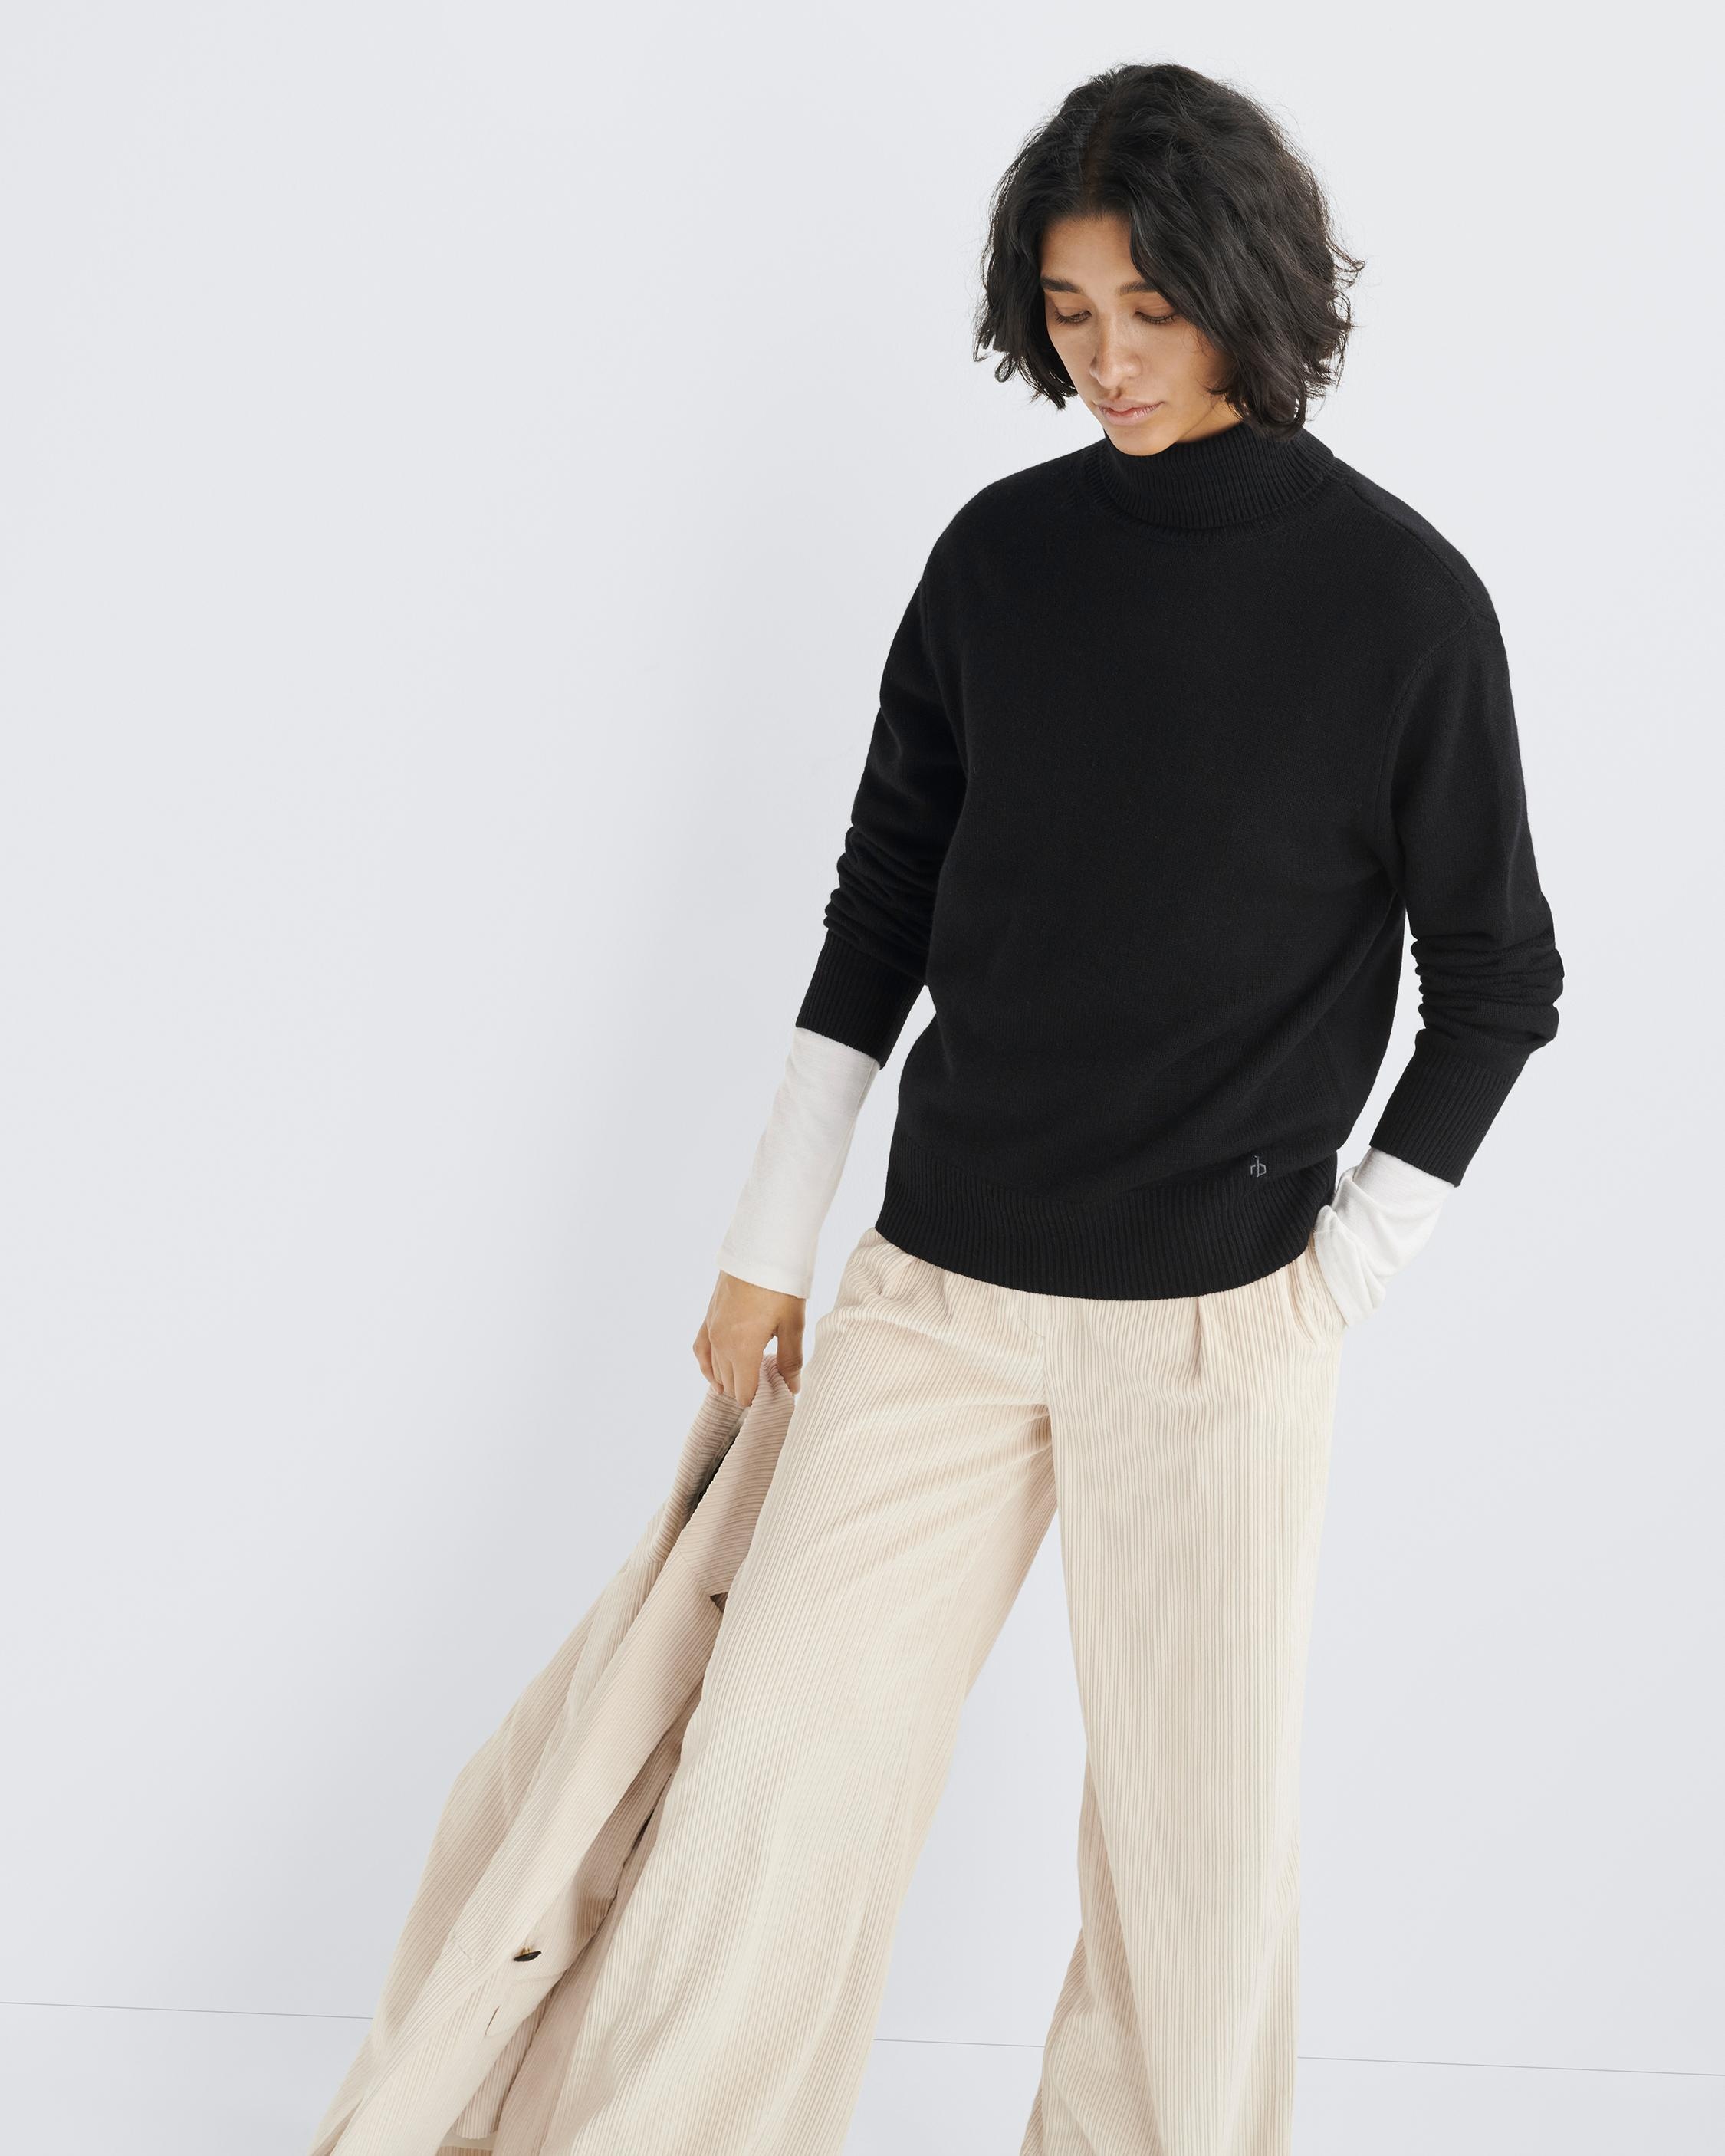 Talan Cashmere Turtleneck
Relaxed Fit - 7